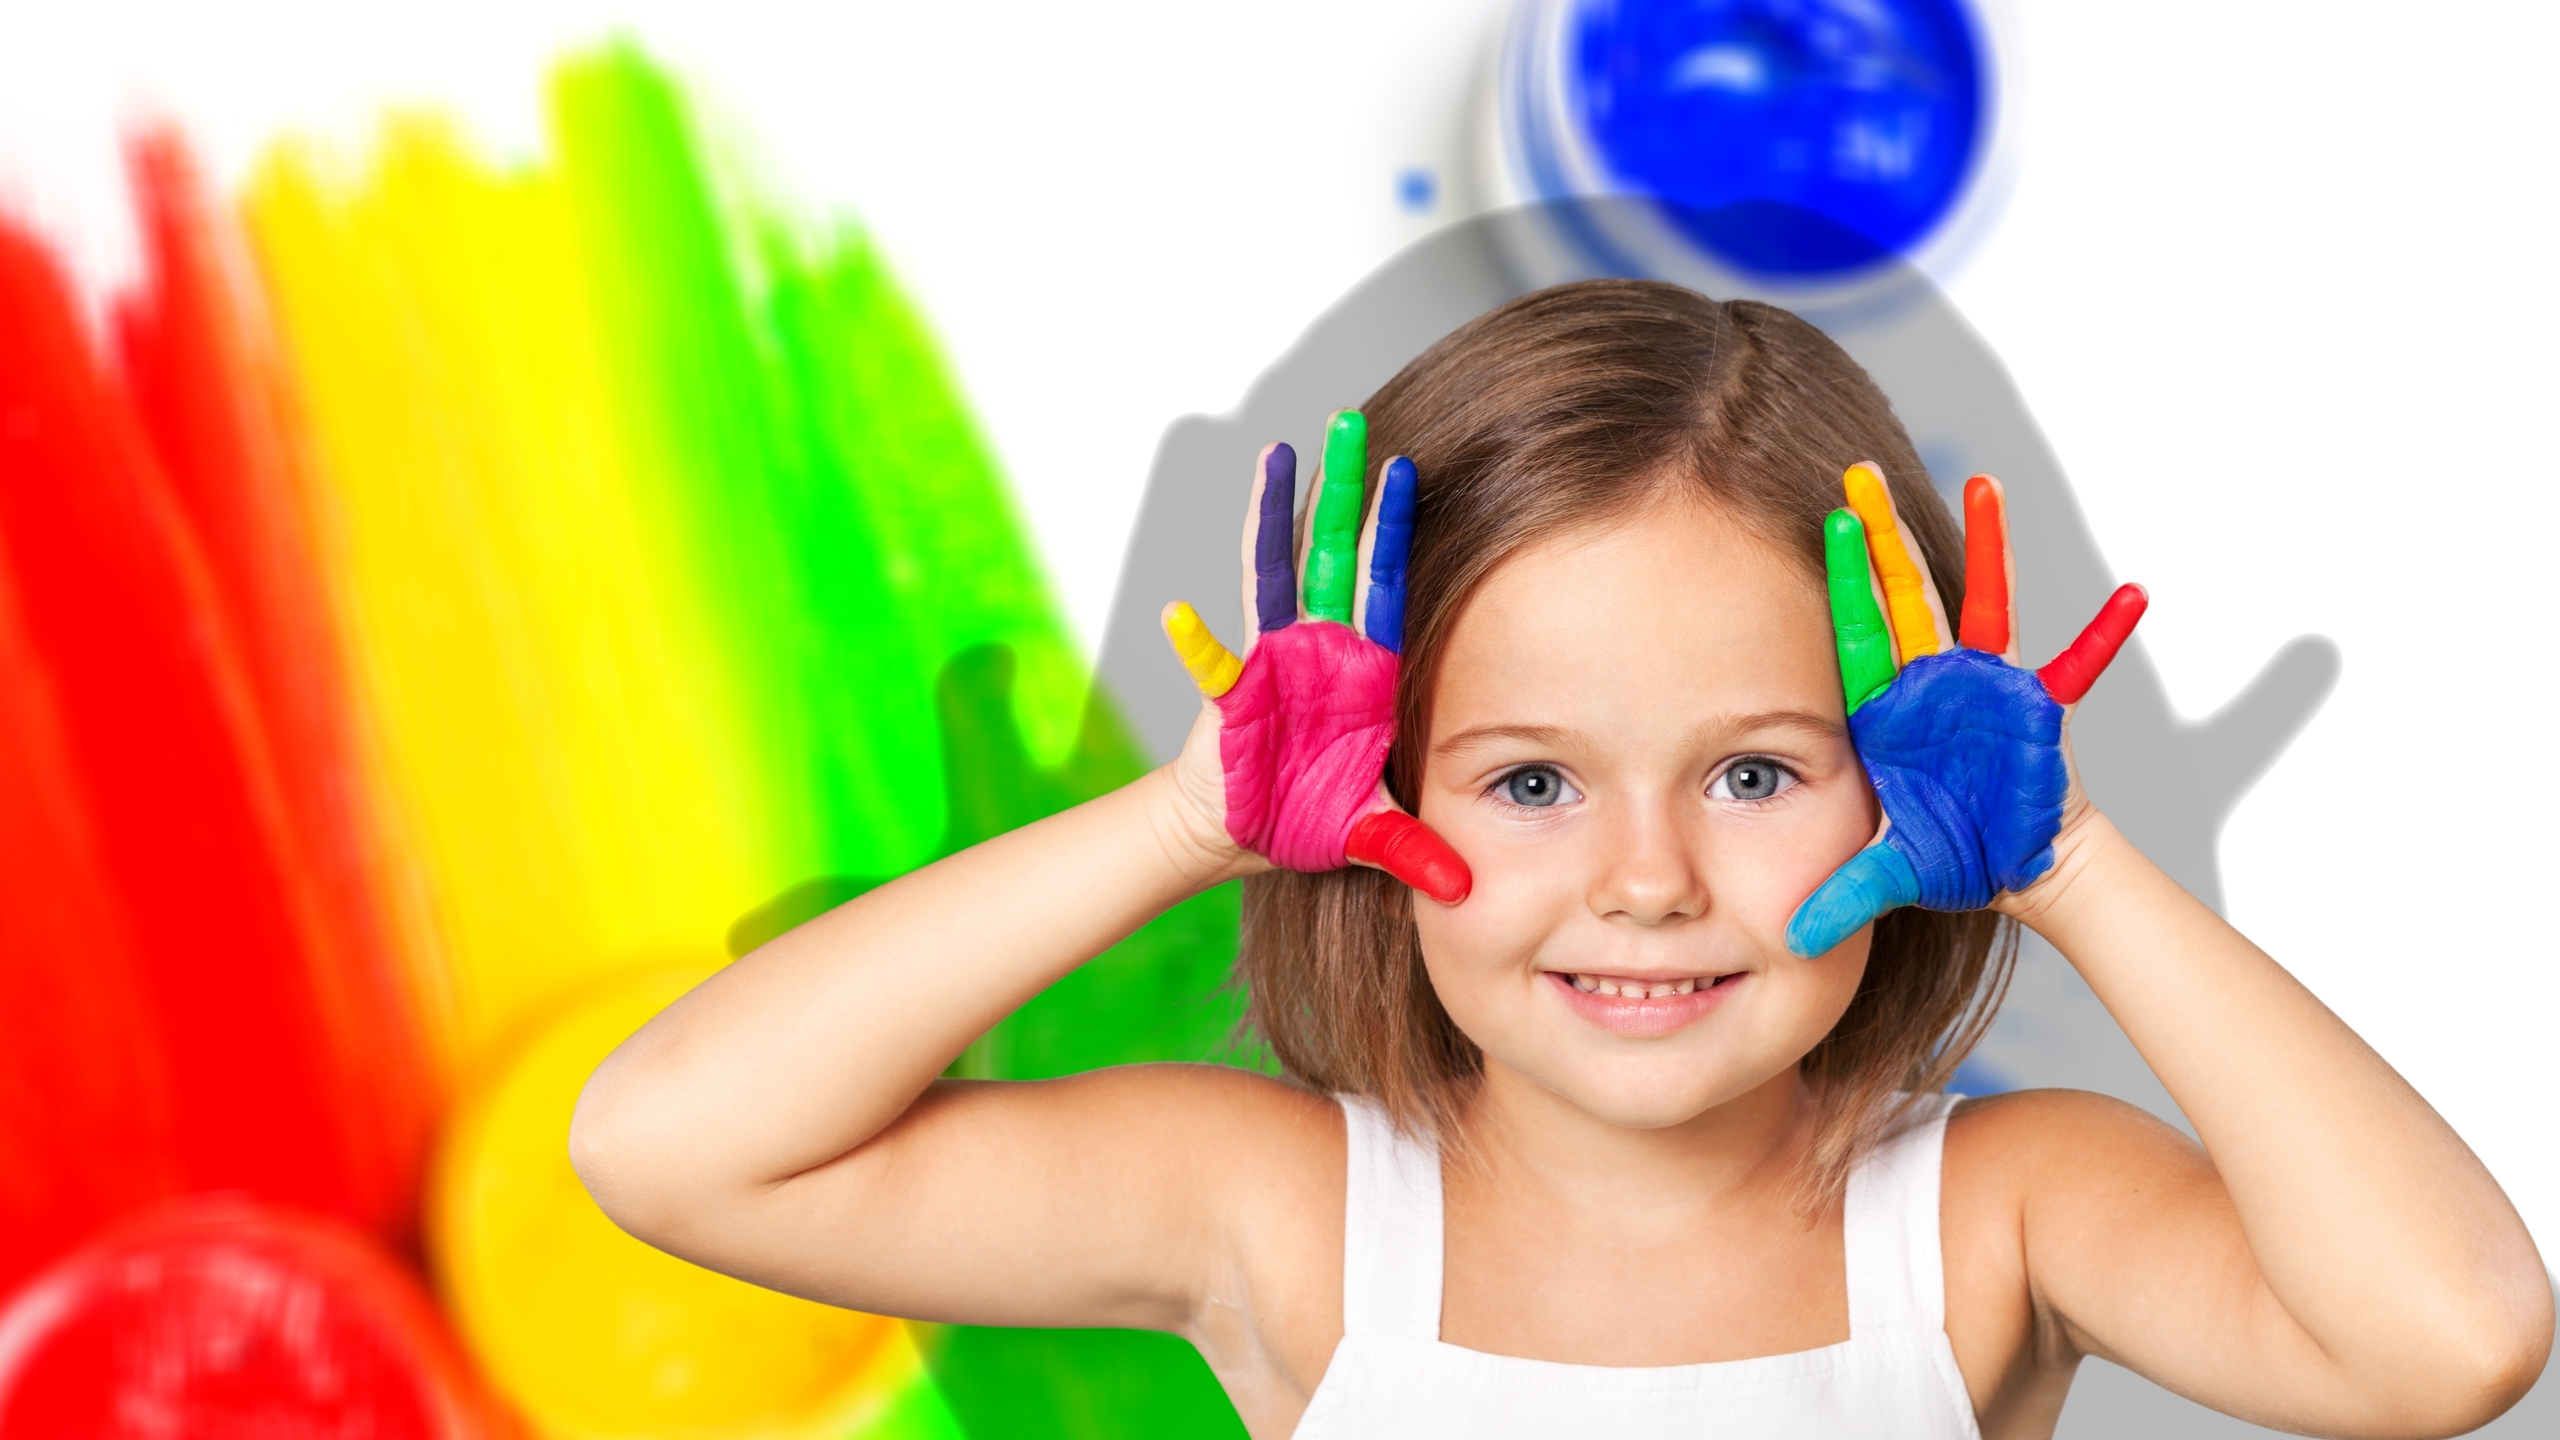 Image: Child, girl, smile, hands, bright paint, mood